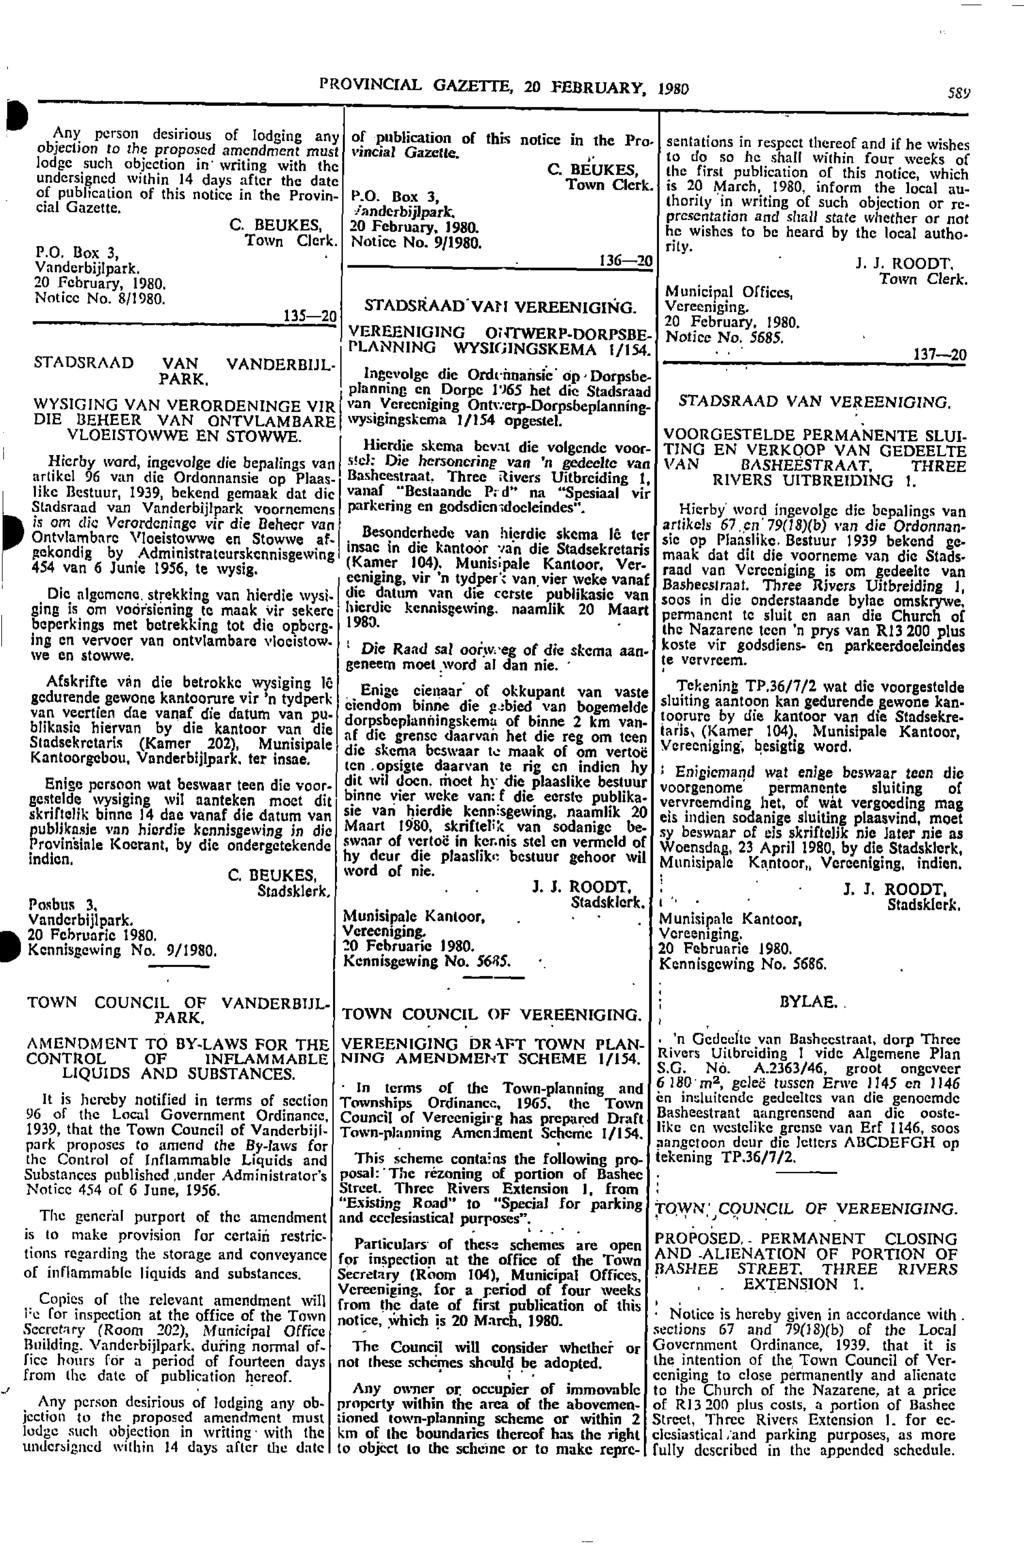 sk PROVNCAL GAZETTE 20 FEBRUARY 1980 589 RP Any person desirious of lodging any of publication of this notice in the Proobjection to the proposed amendment must sentations in respect thereof and